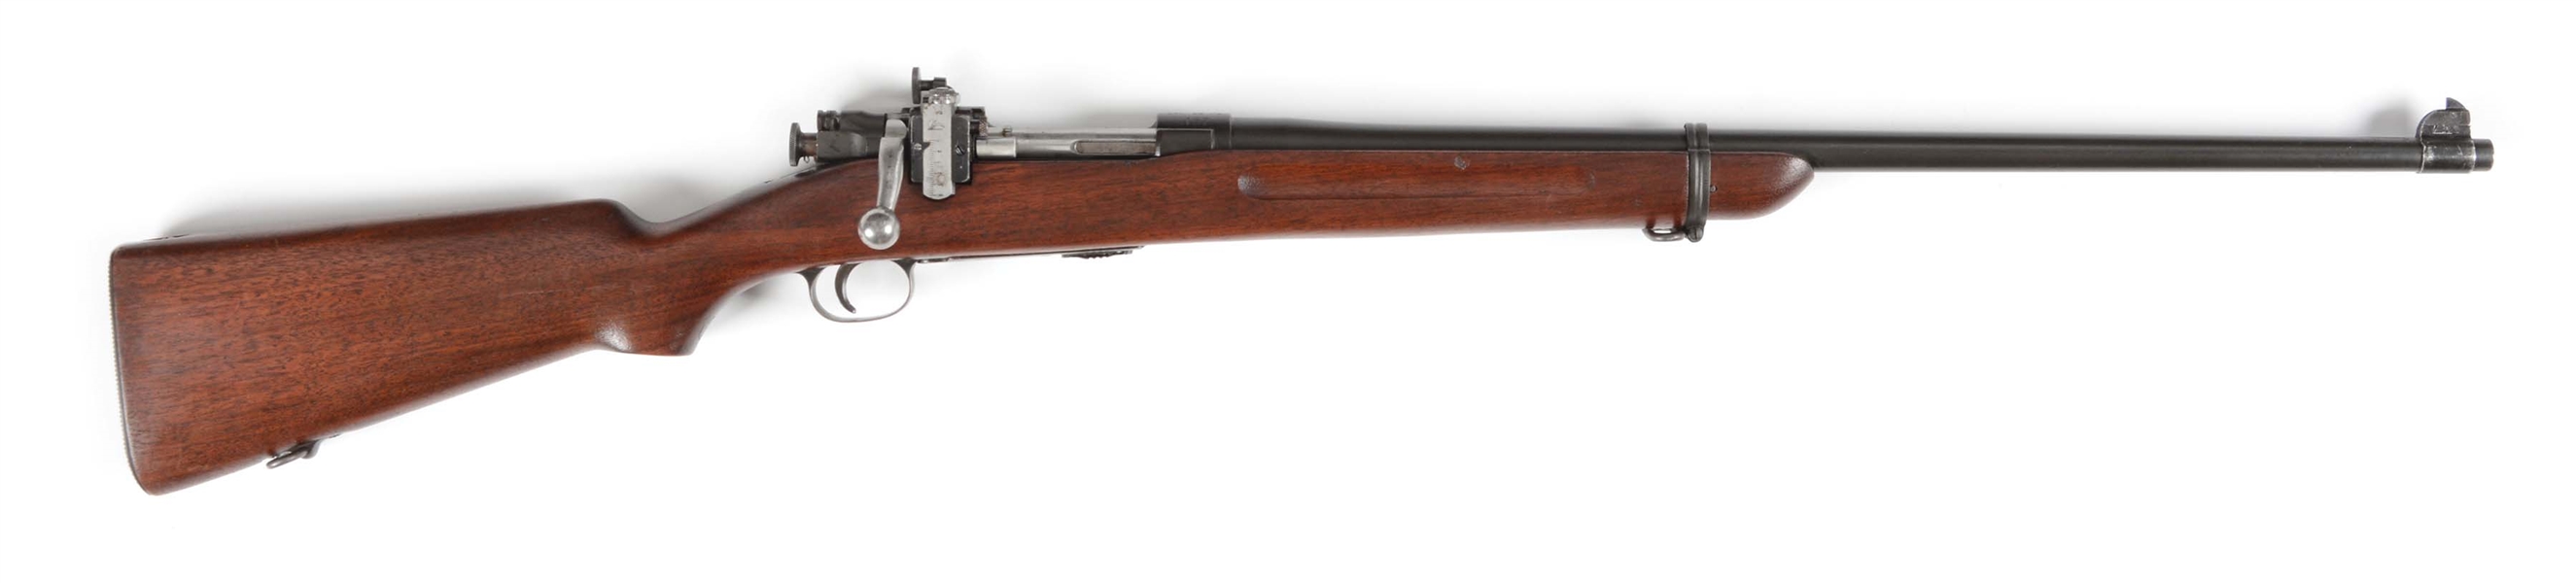 (C) SPRINGFIELD ARMORY 1922-M2 BOLT ACTION TARGET RIFLE.